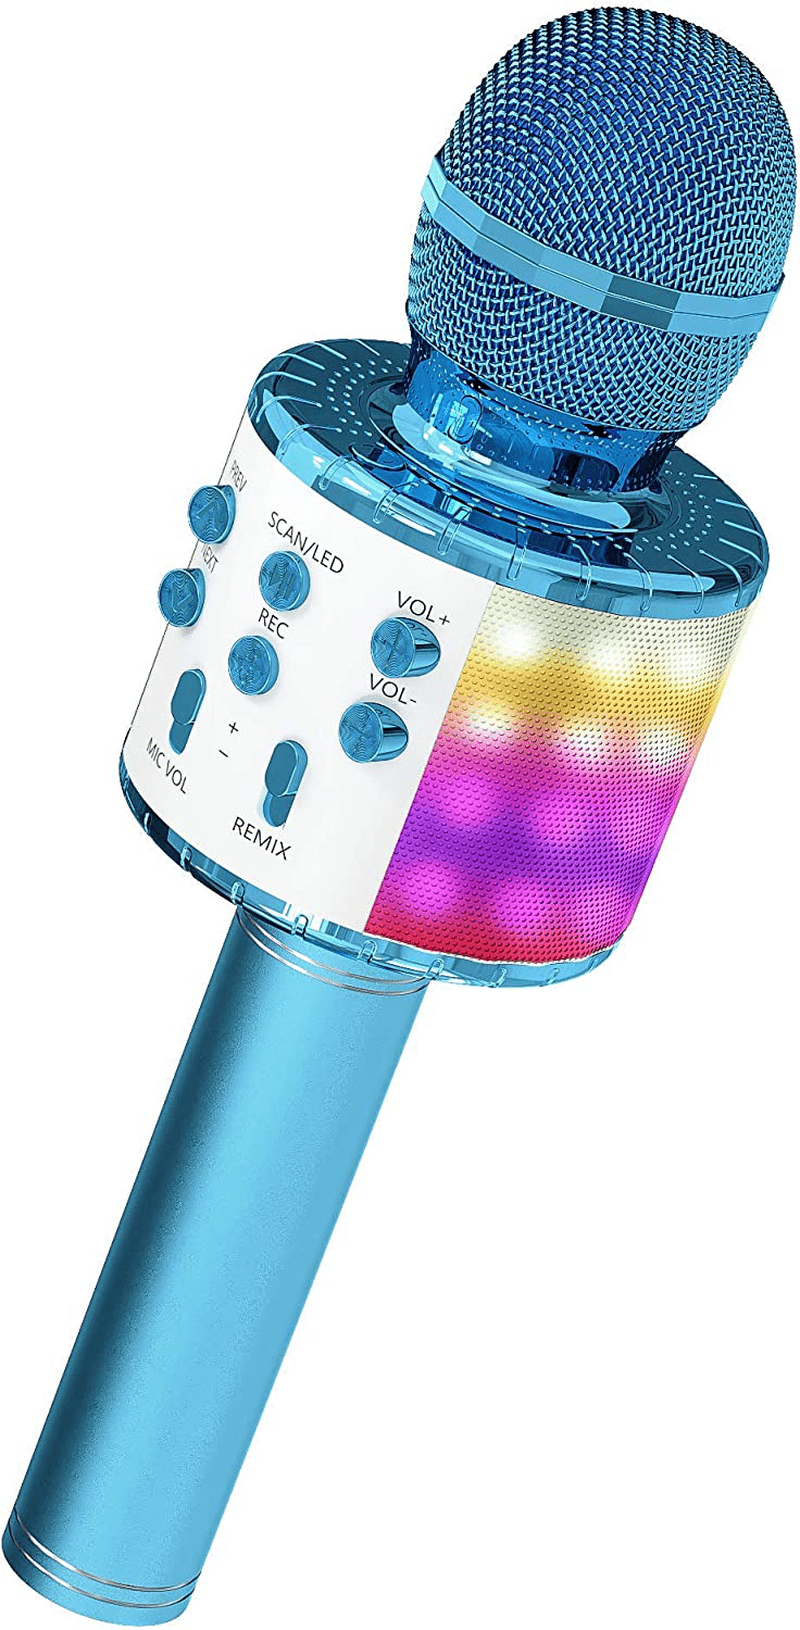 OVELLIC Karaoke Microphone for Kids, Wireless Bluetooth Karaoke Microphone with LED Lights, Portable Handheld Mic Speaker Machine, Great Gifts Toys for Girls Boys Adults All Age (Rose Gold) Electronics > Audio > Audio Components > Microphones OVELLIC Blue  